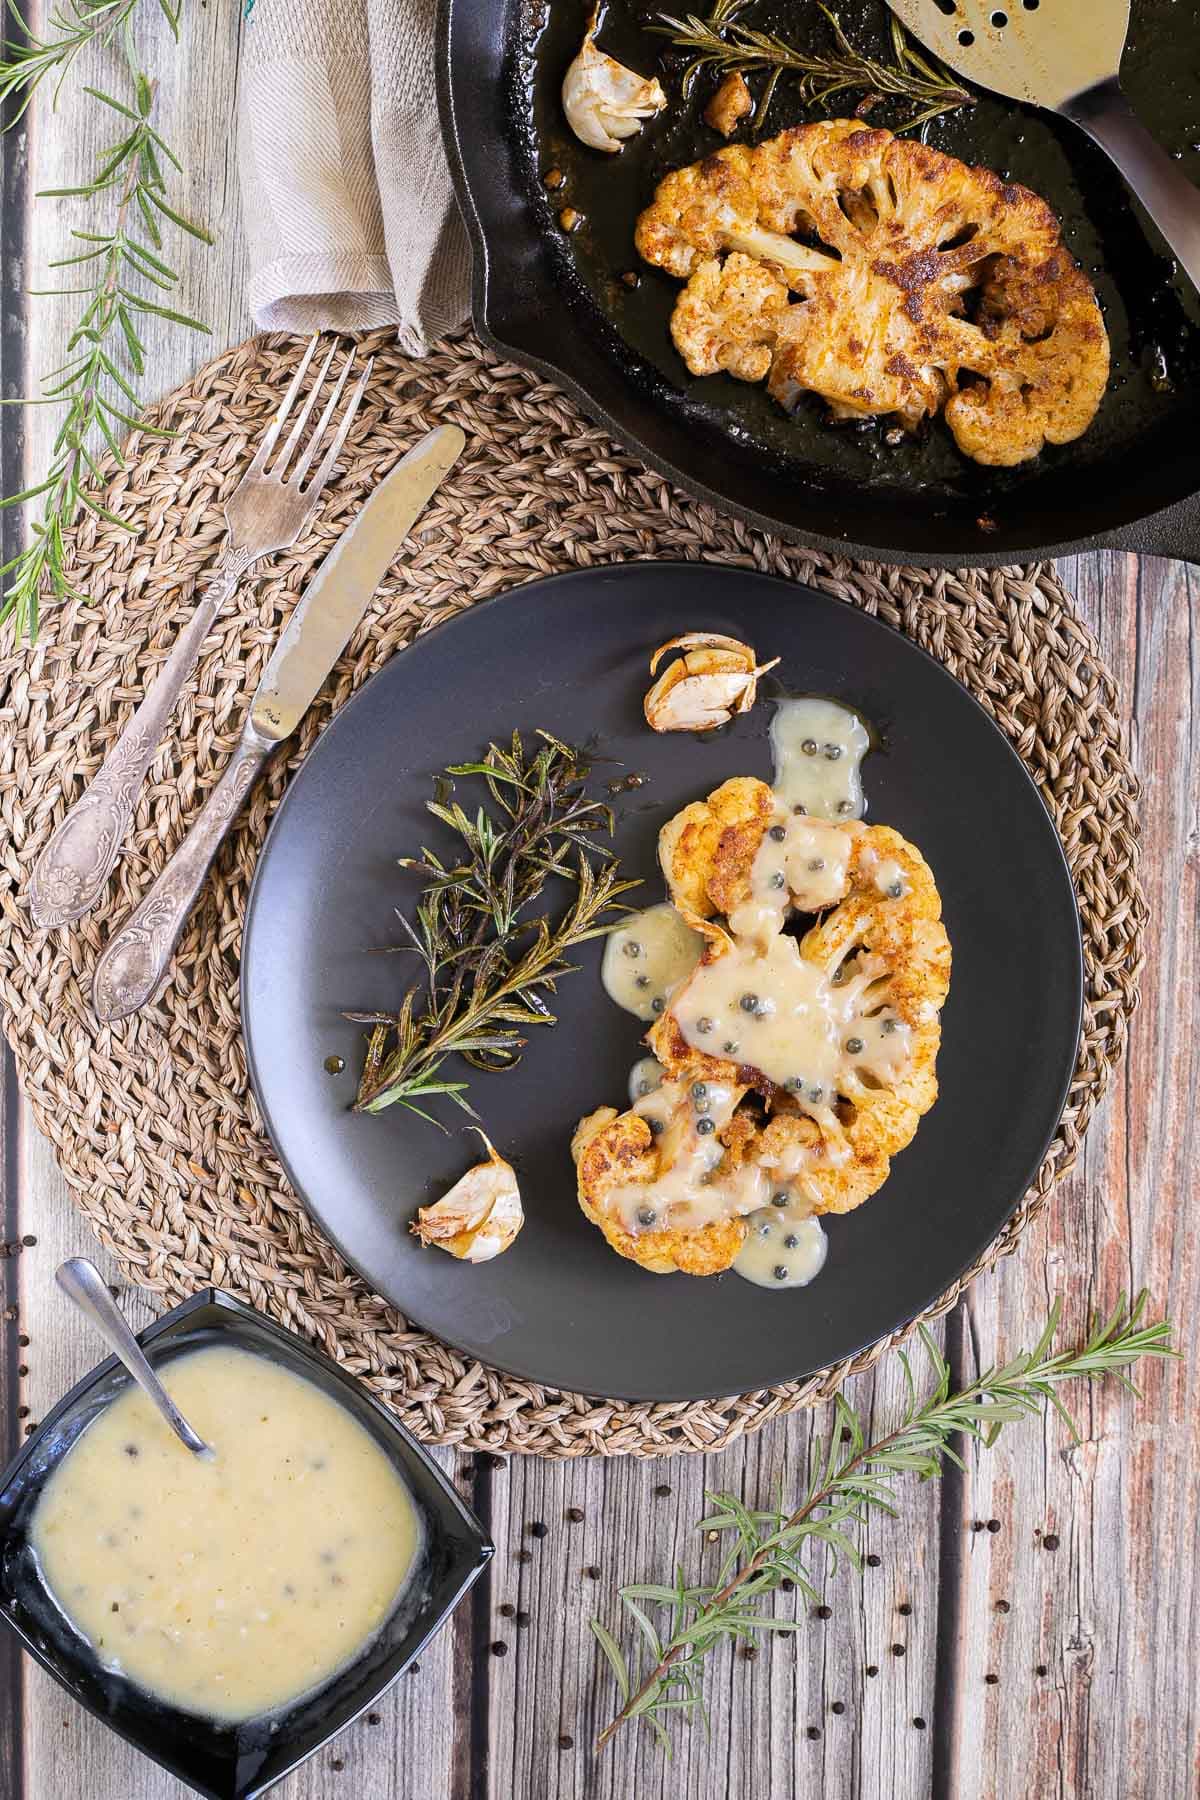 A crispy brown orange cauliflower slice is served on a black plate with roasted garlic cloves and wilted rosemary twigs. The leftover slices are in a cast iron skillet. A black bowl of green peppercorn sauce is place next to it.